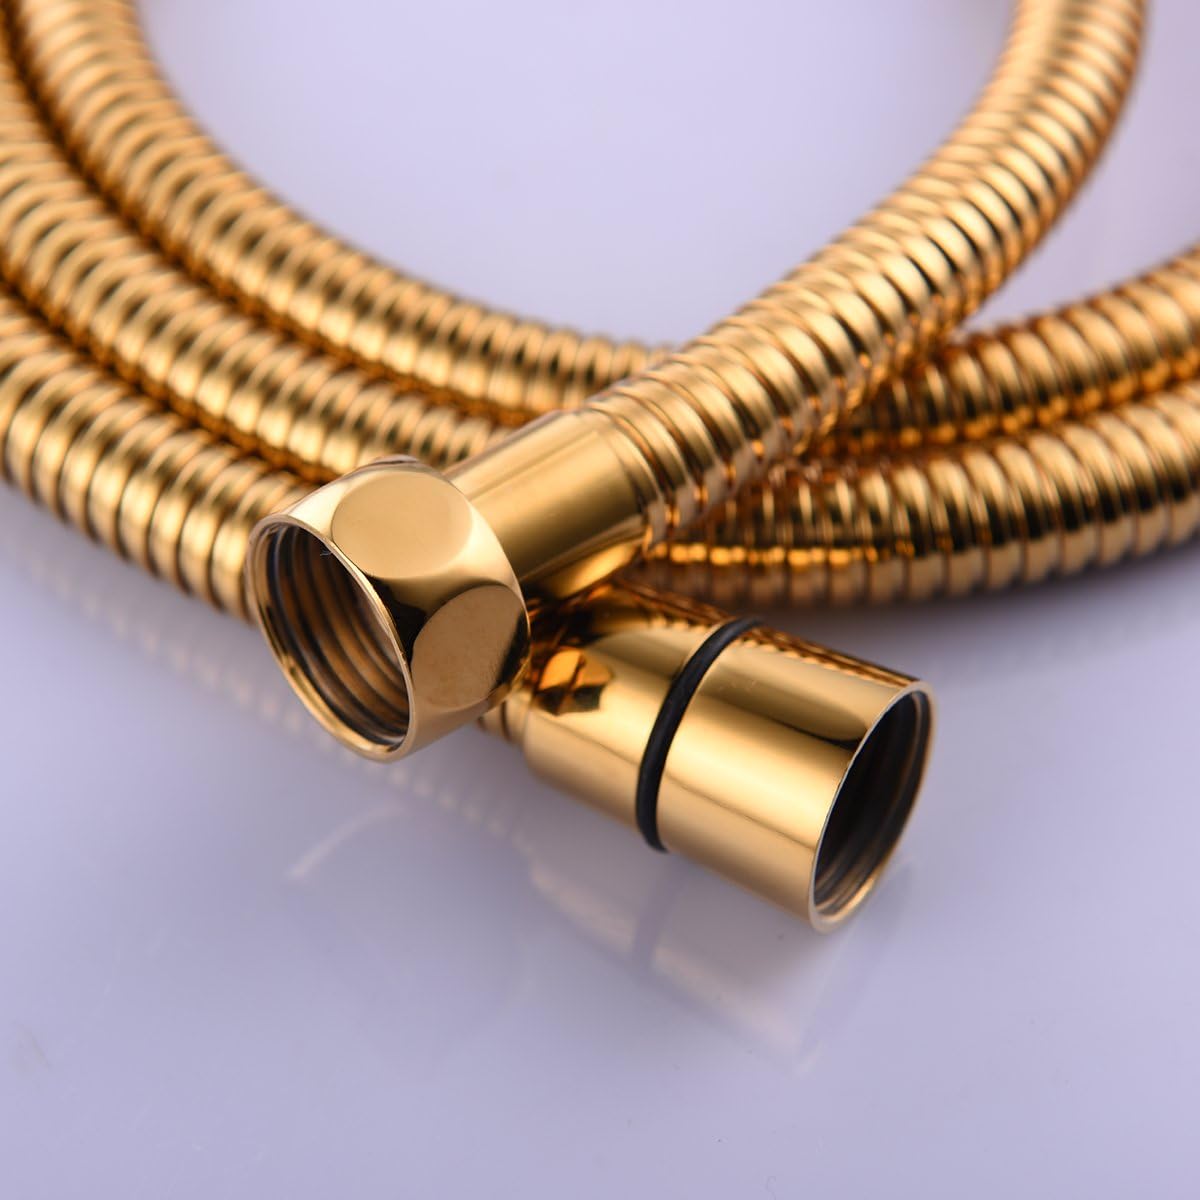 Fossa Large Bore Shower Hose 1m -Supper Low Water Pressure Boosting Shower Hoses with Chrome, Universal Anti-Kink and Leak-Proof color (Gold) Fossa Home